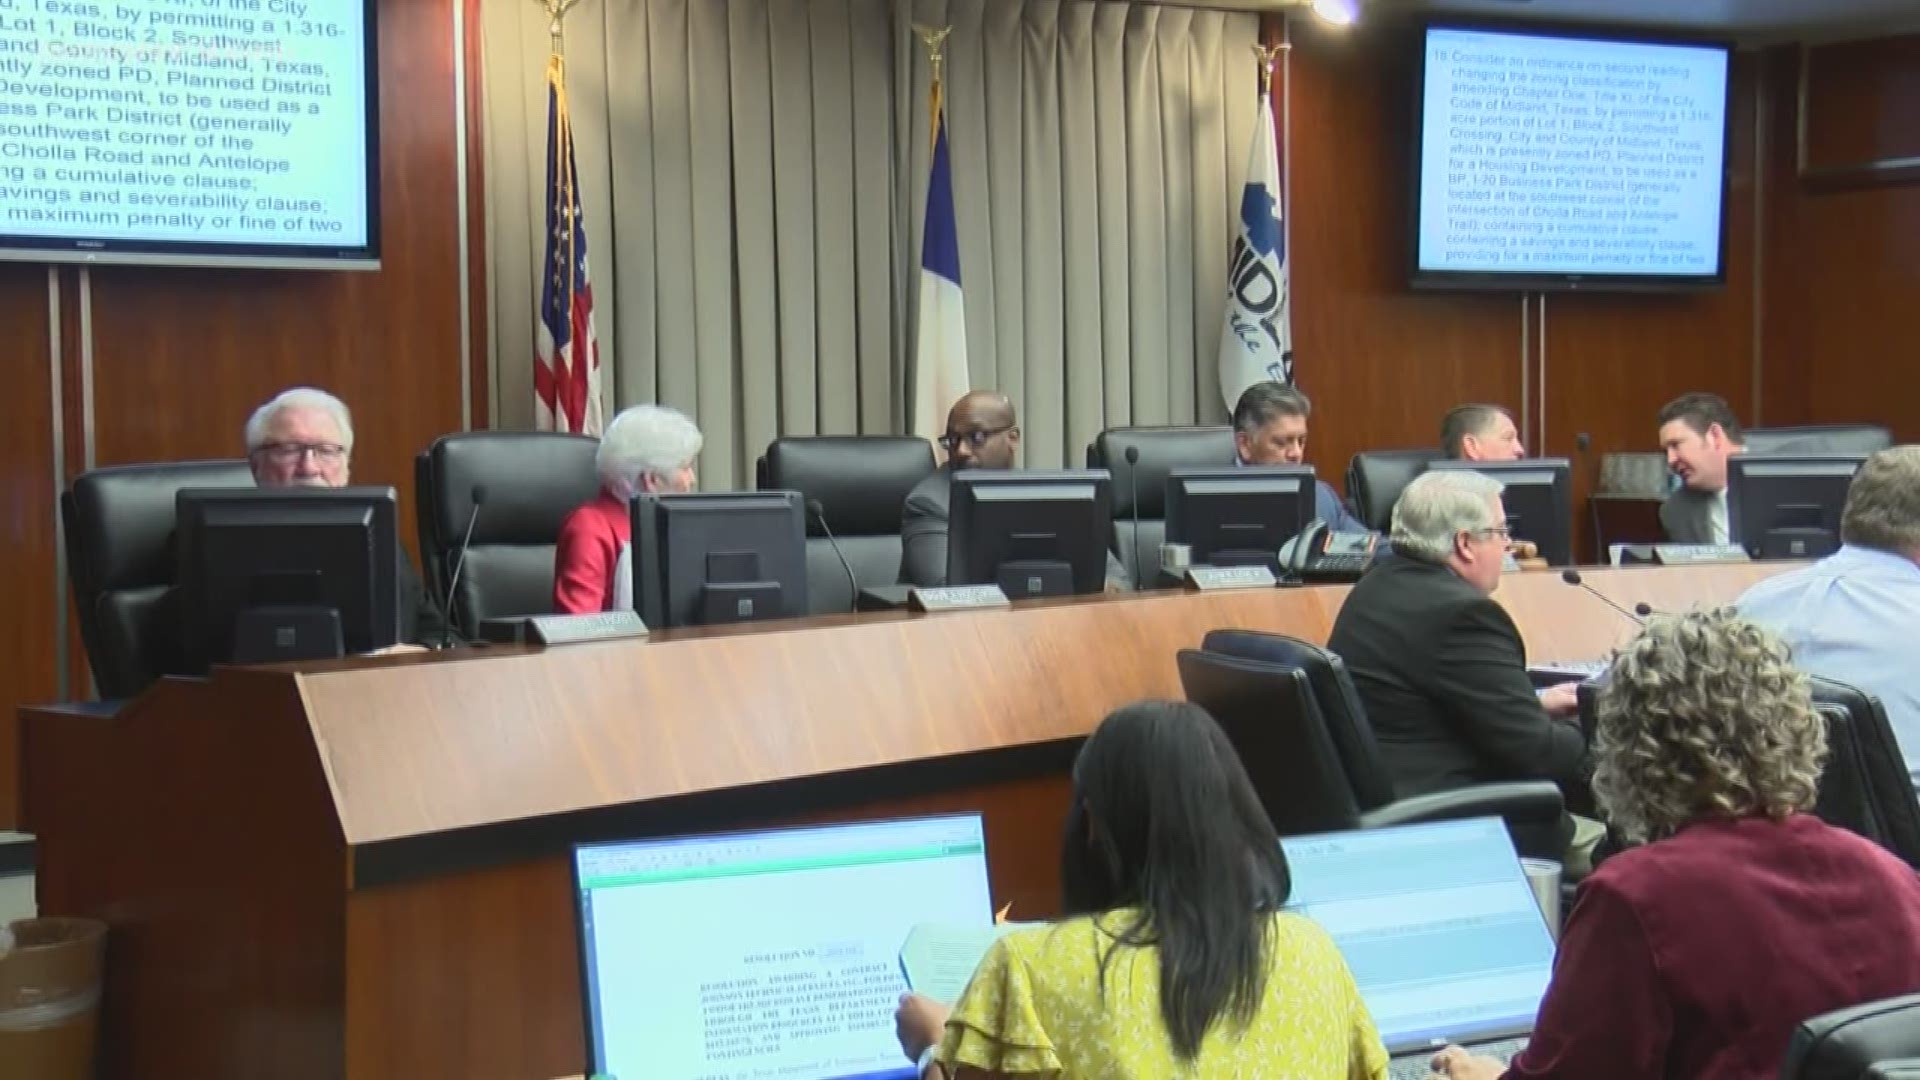 The City Council also approved the 2020 budget and tax rate.